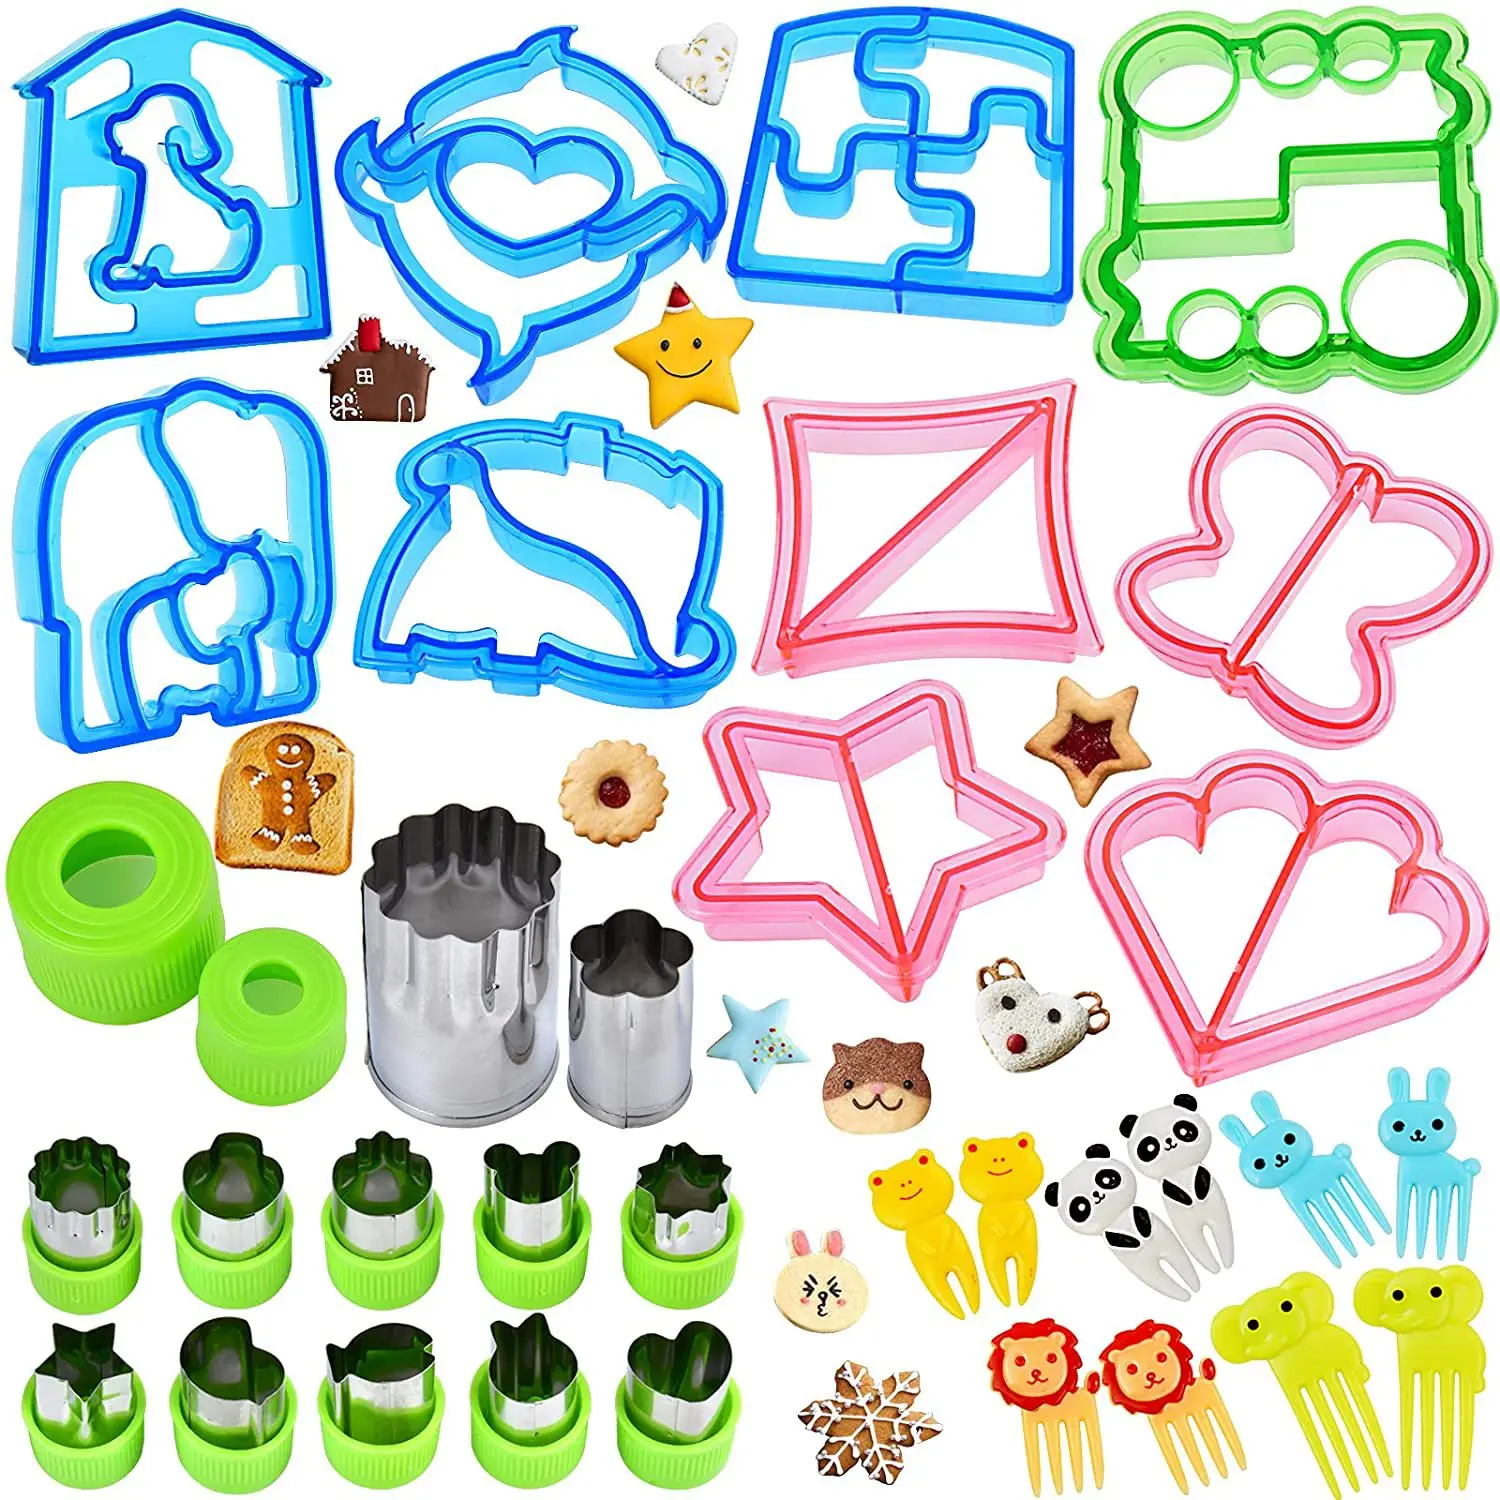 

Amazon Fun 32pcs DIY Stainless Steel Fruit Cutter Cookie Cutter Plastic Sandwich Cutter Set for Kids Lunch Bento Tools